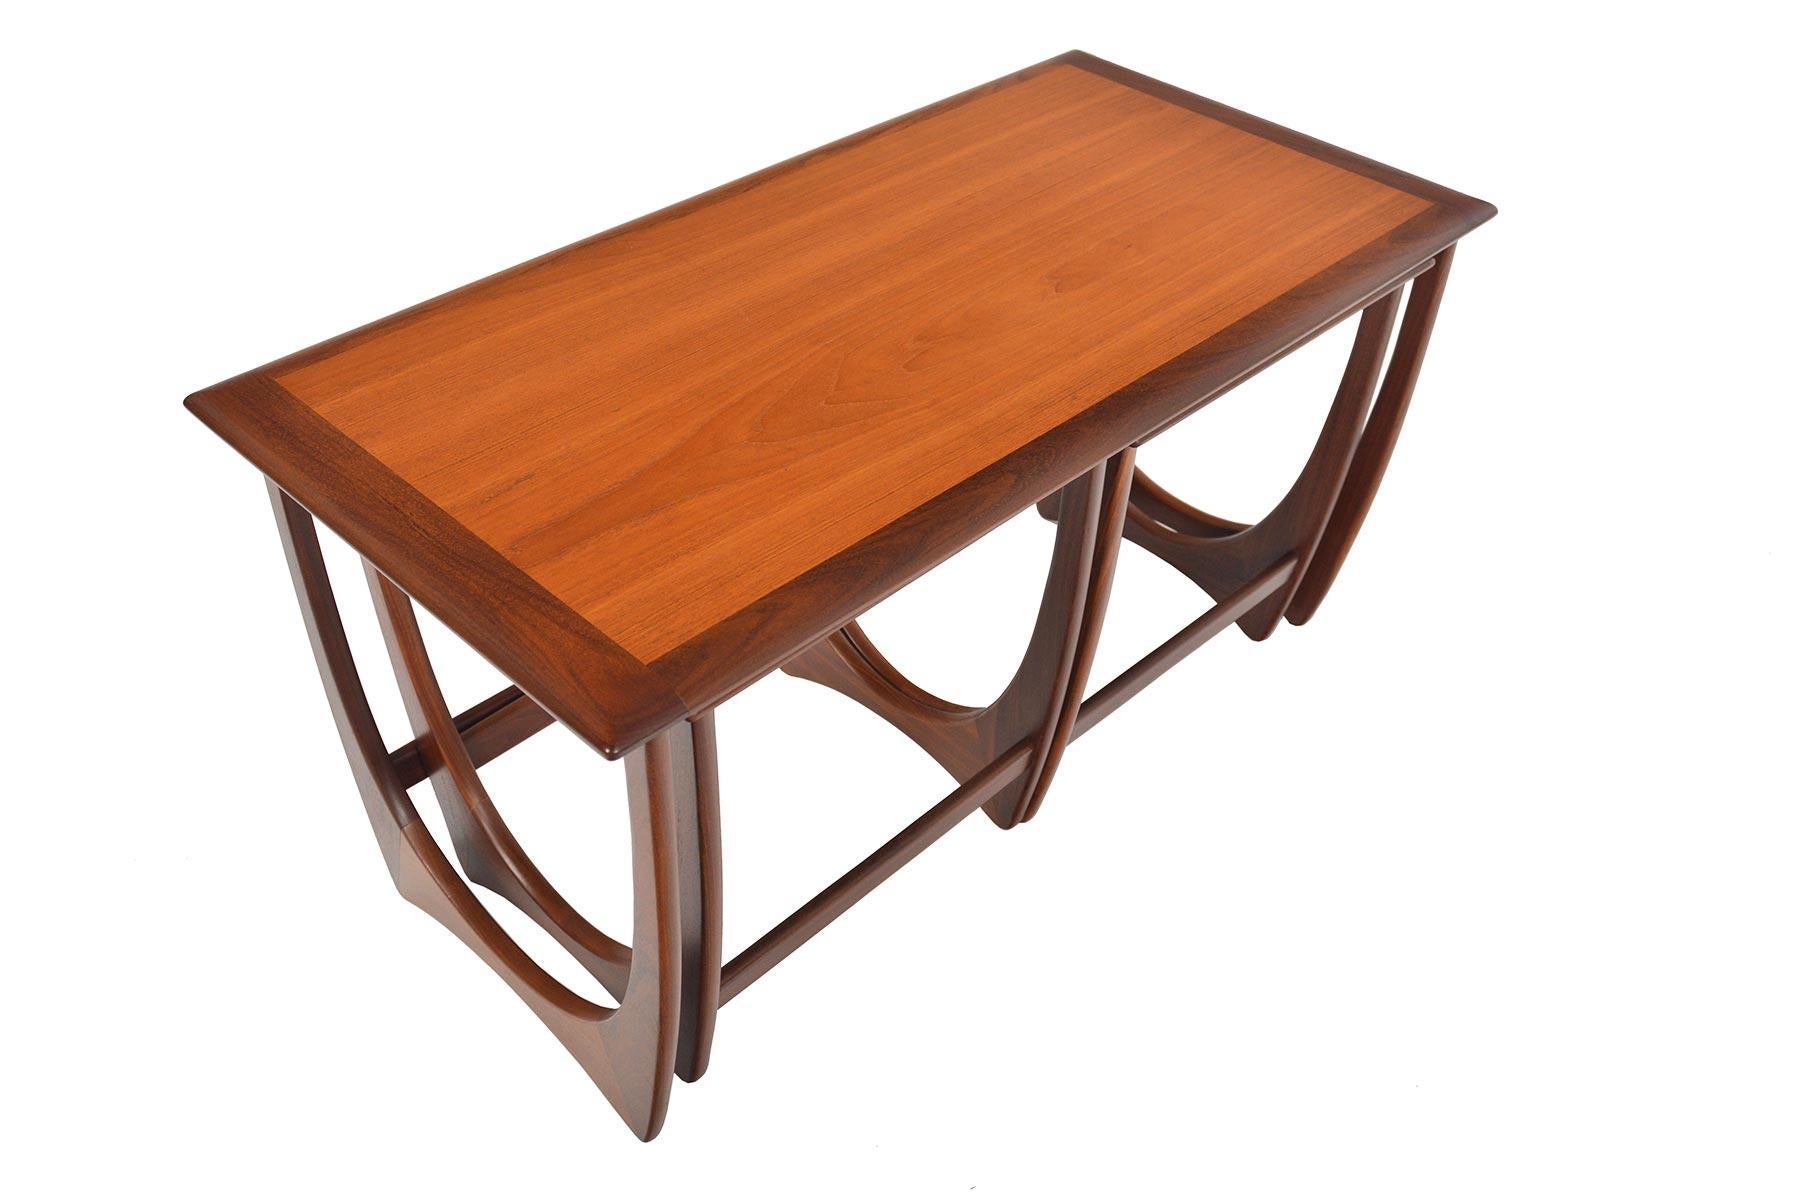 This timeless set of Mid-Century Modern G Plan Astro teak nesting tables was designed by Victor Wilkins in the 1960s. Gorgeous design and exceptional construction throughout. This rare configuration offers one large table and two matching side